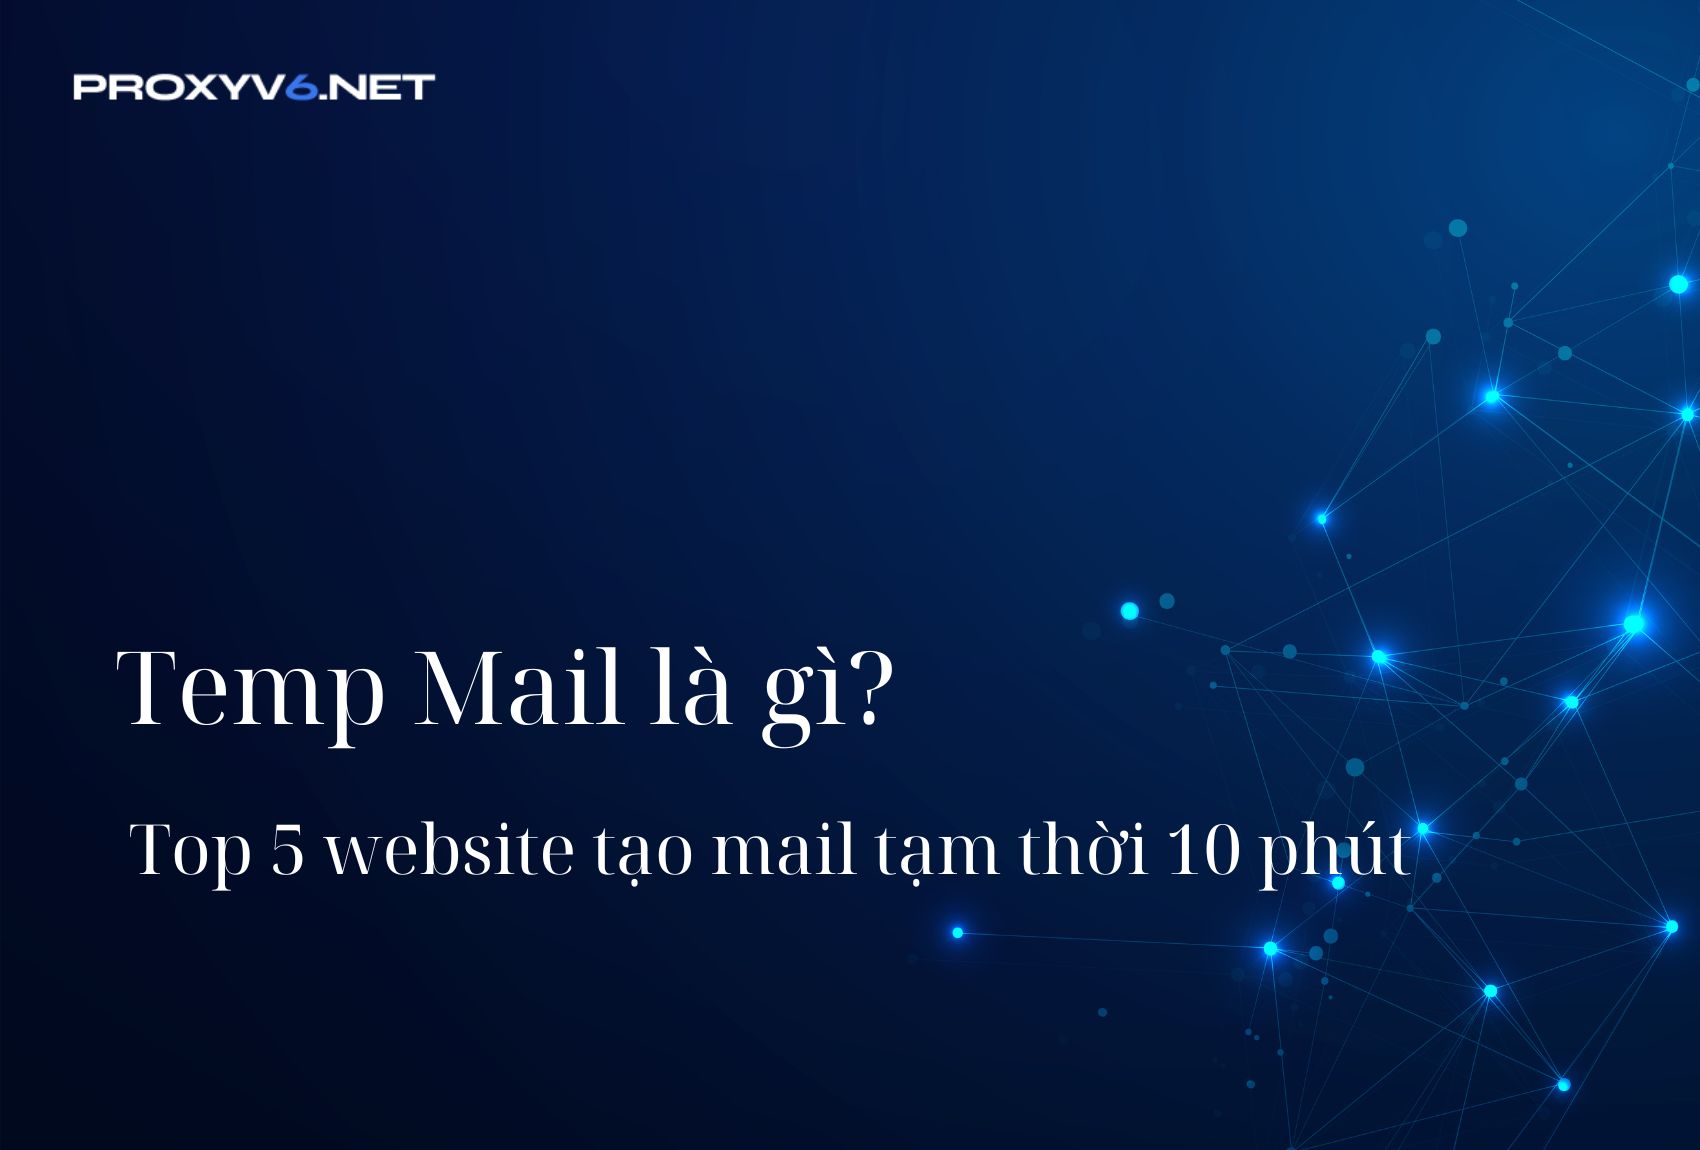 What is Temp Mail? Top 5 websites to create temporary emails in 10 minutes